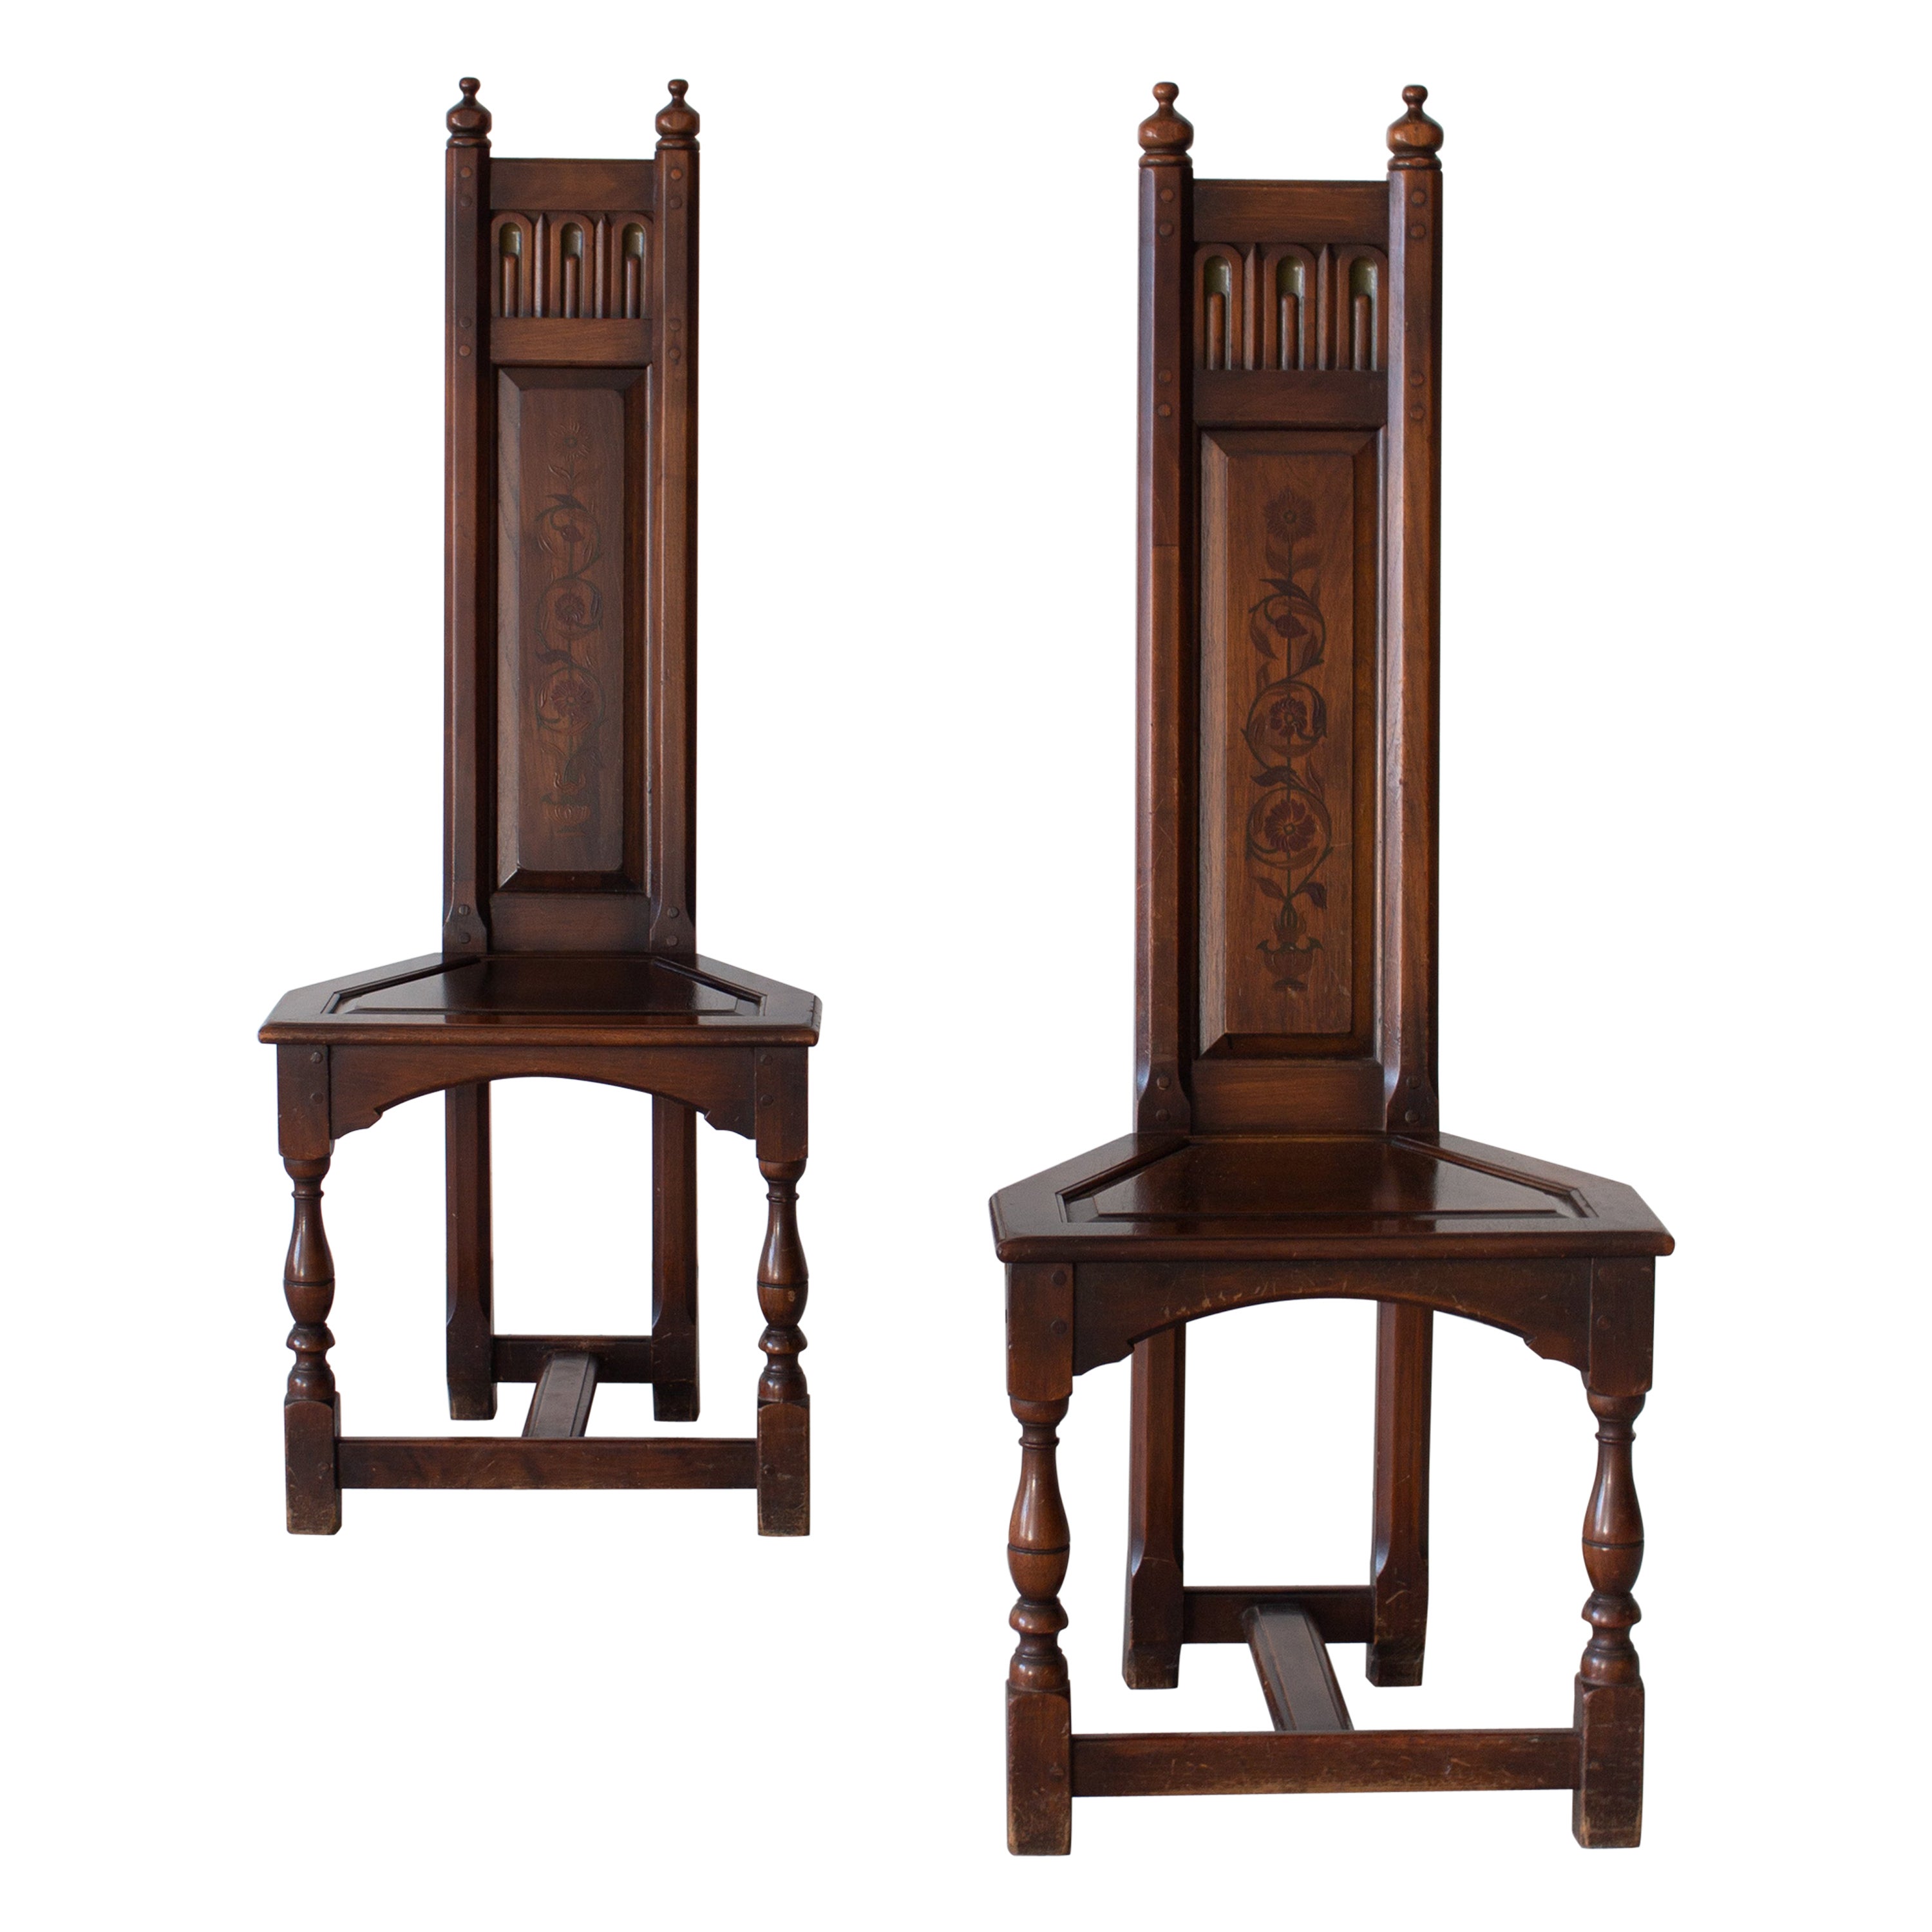 Pair of Gothic Revival Decorated Wooden Chairs by Kittinger